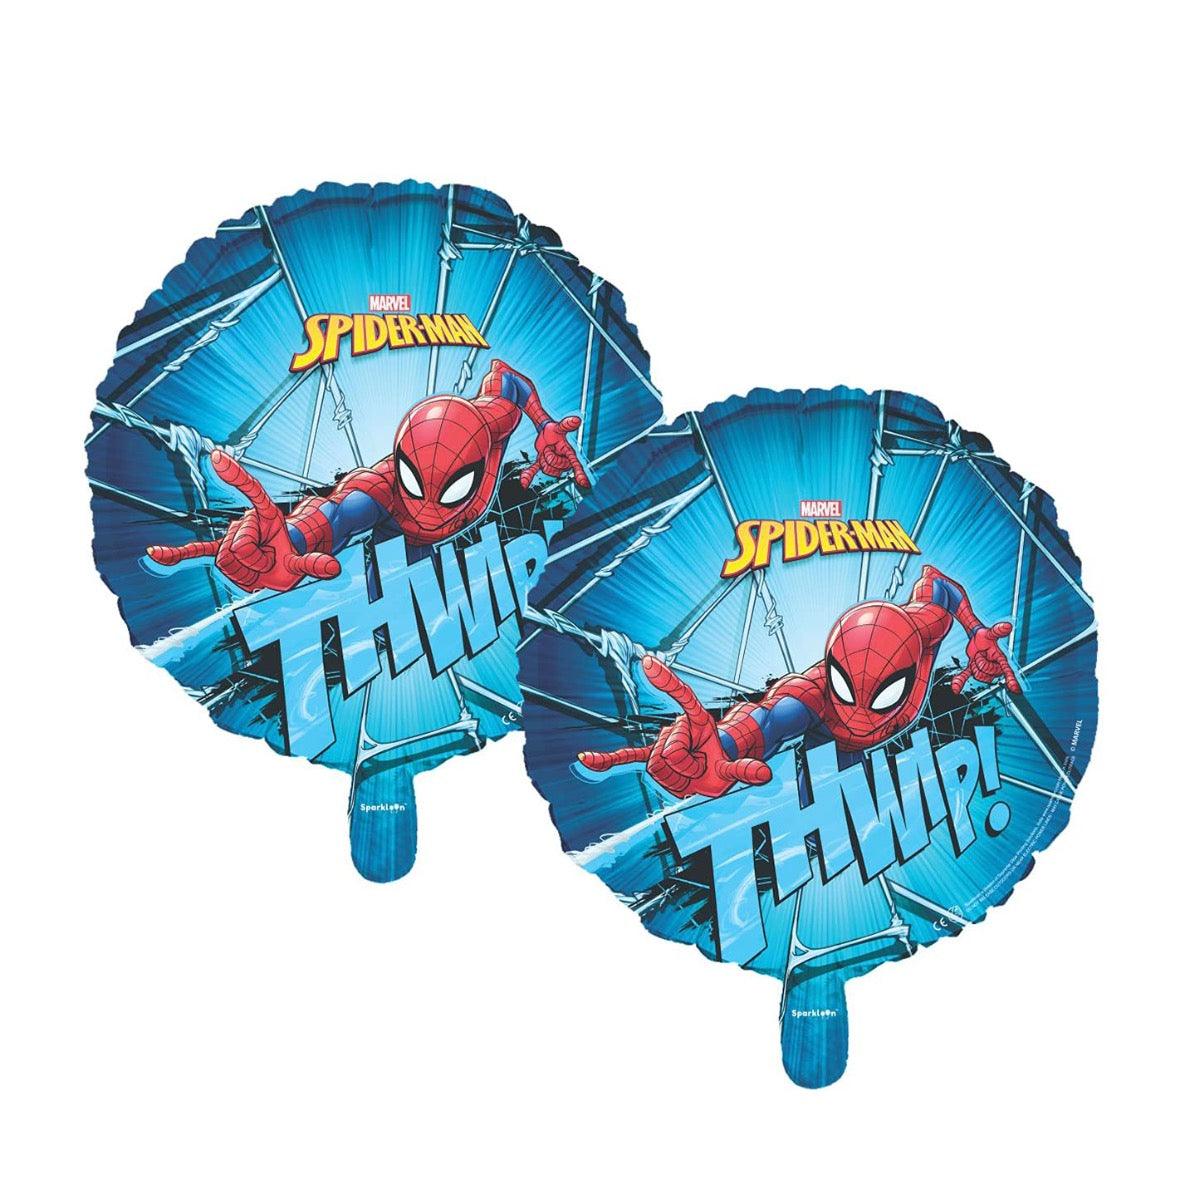 Marvel Spider Man Set, Pack of 5 Foil Balloons - 2 Round, 1 Mini Cutout and 2 Star